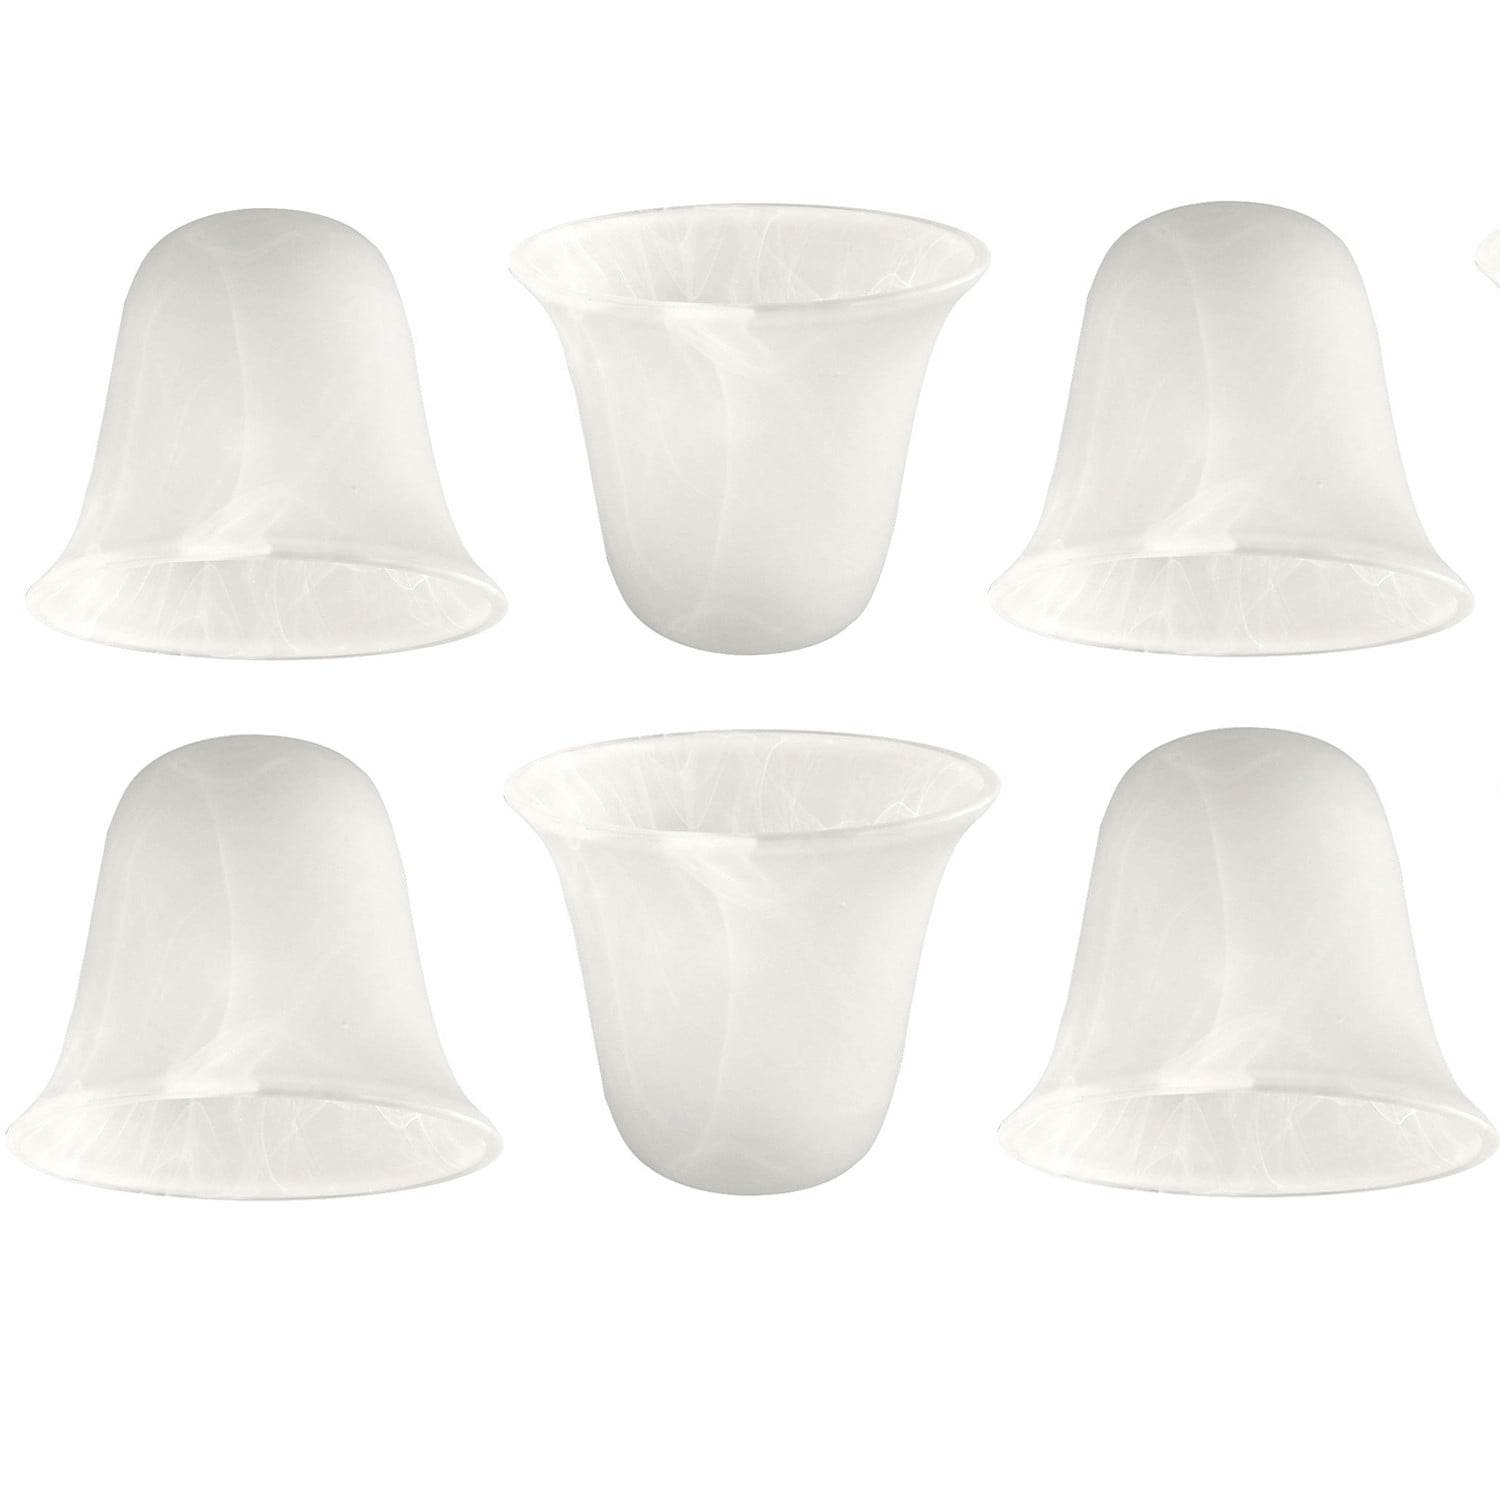 Frosted Square Deco Glass Shade 2 1/4" Fitter for Ceiling Fan Light Kit Set of 4 